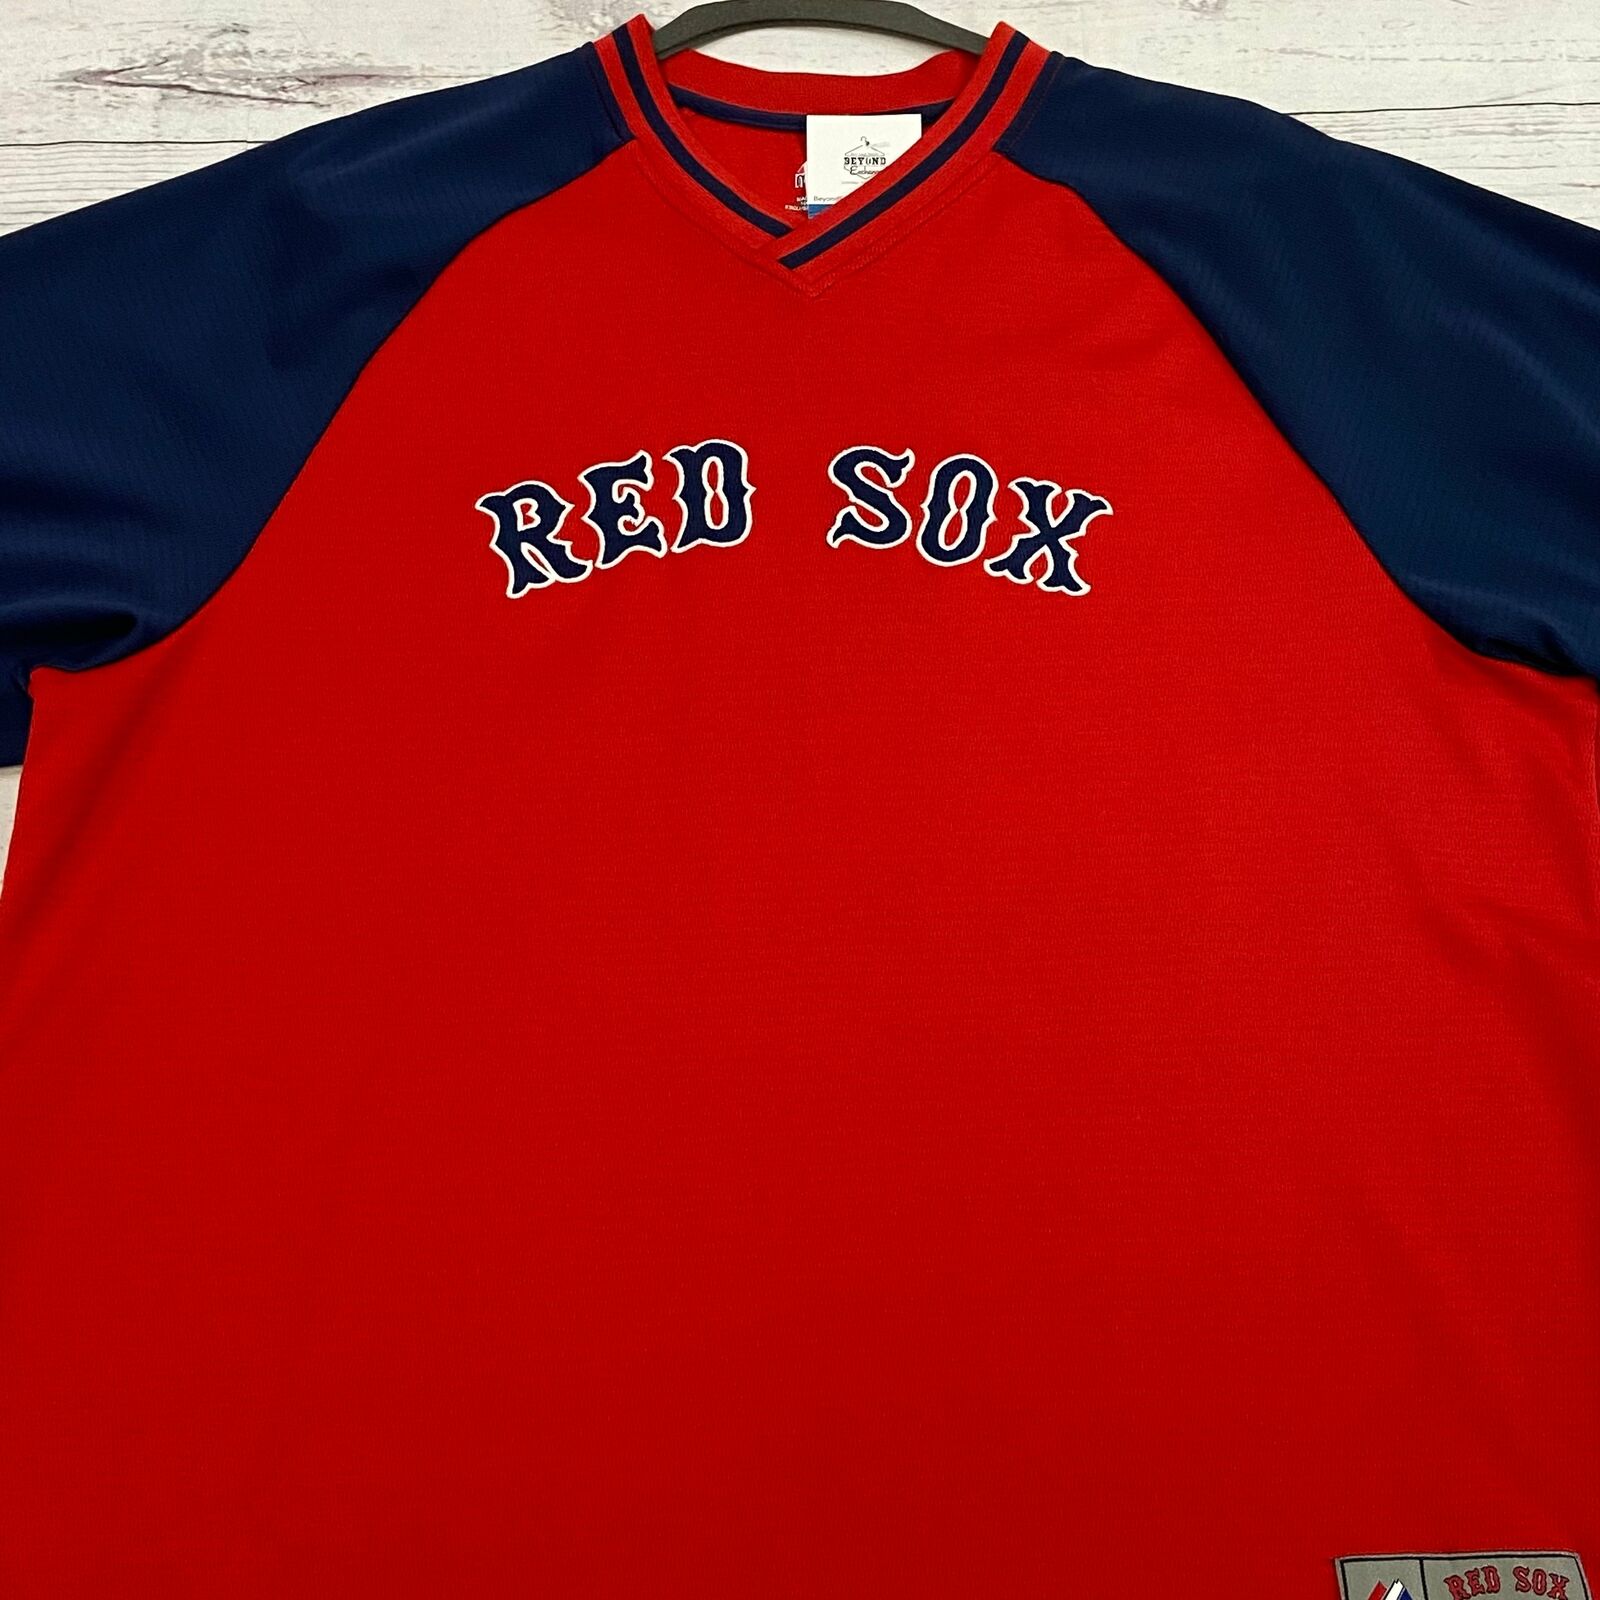 Men's Navy Boston Red Sox Jersey Muscle Sleeveless Pullover